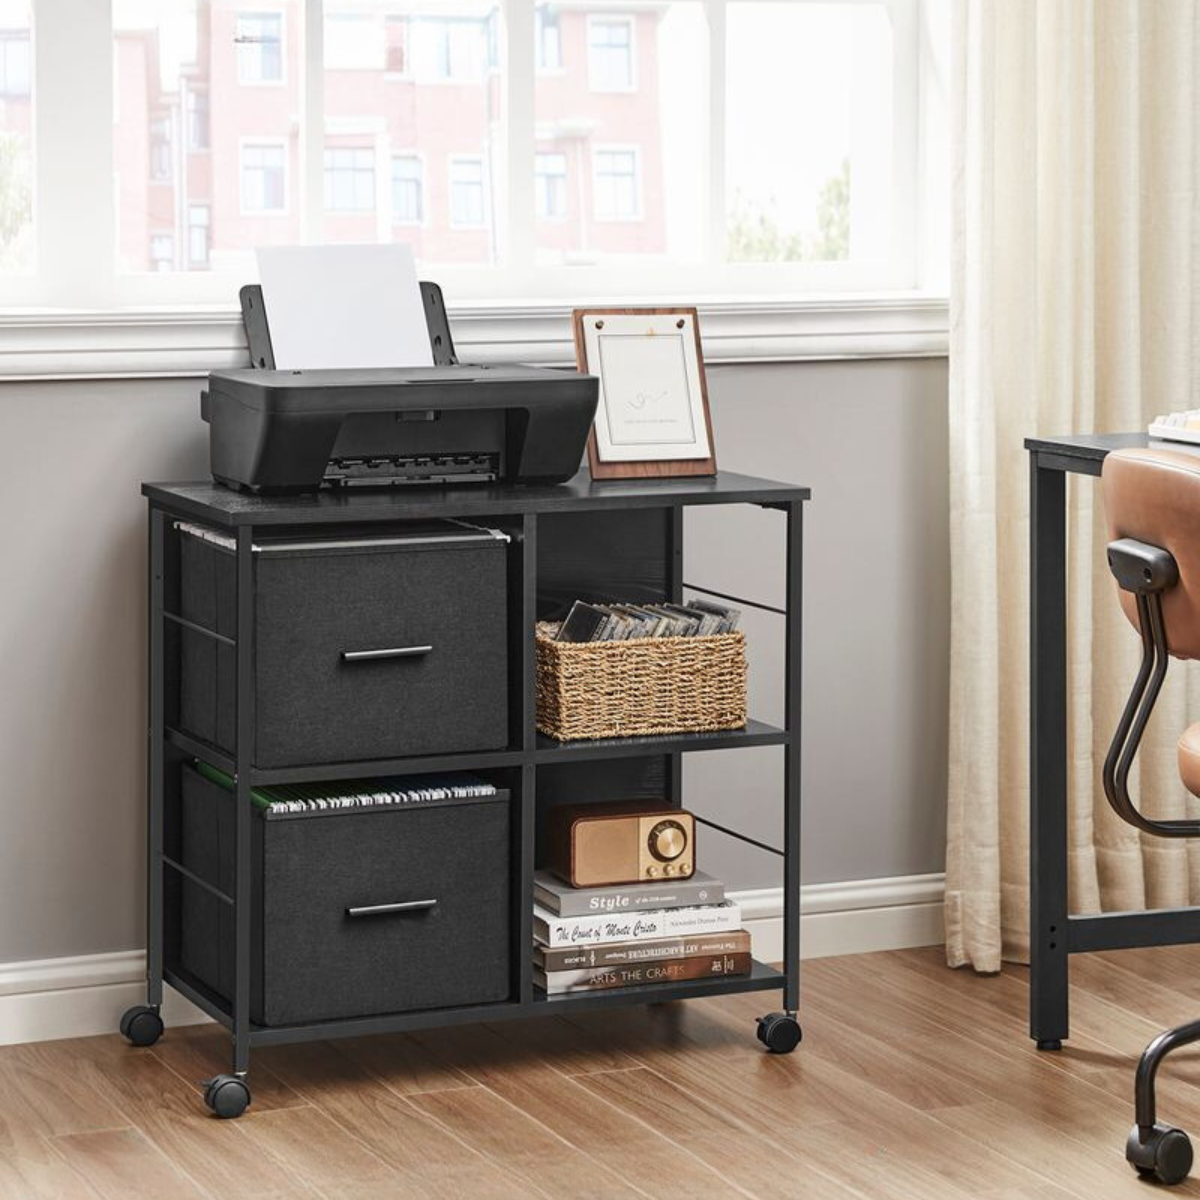 Nancy's Bootle Office Cabinet Black - Storage cabinet - Filing cabinet - Chest of drawers - Industrial - 73.5 x 37.5 x 69 cm